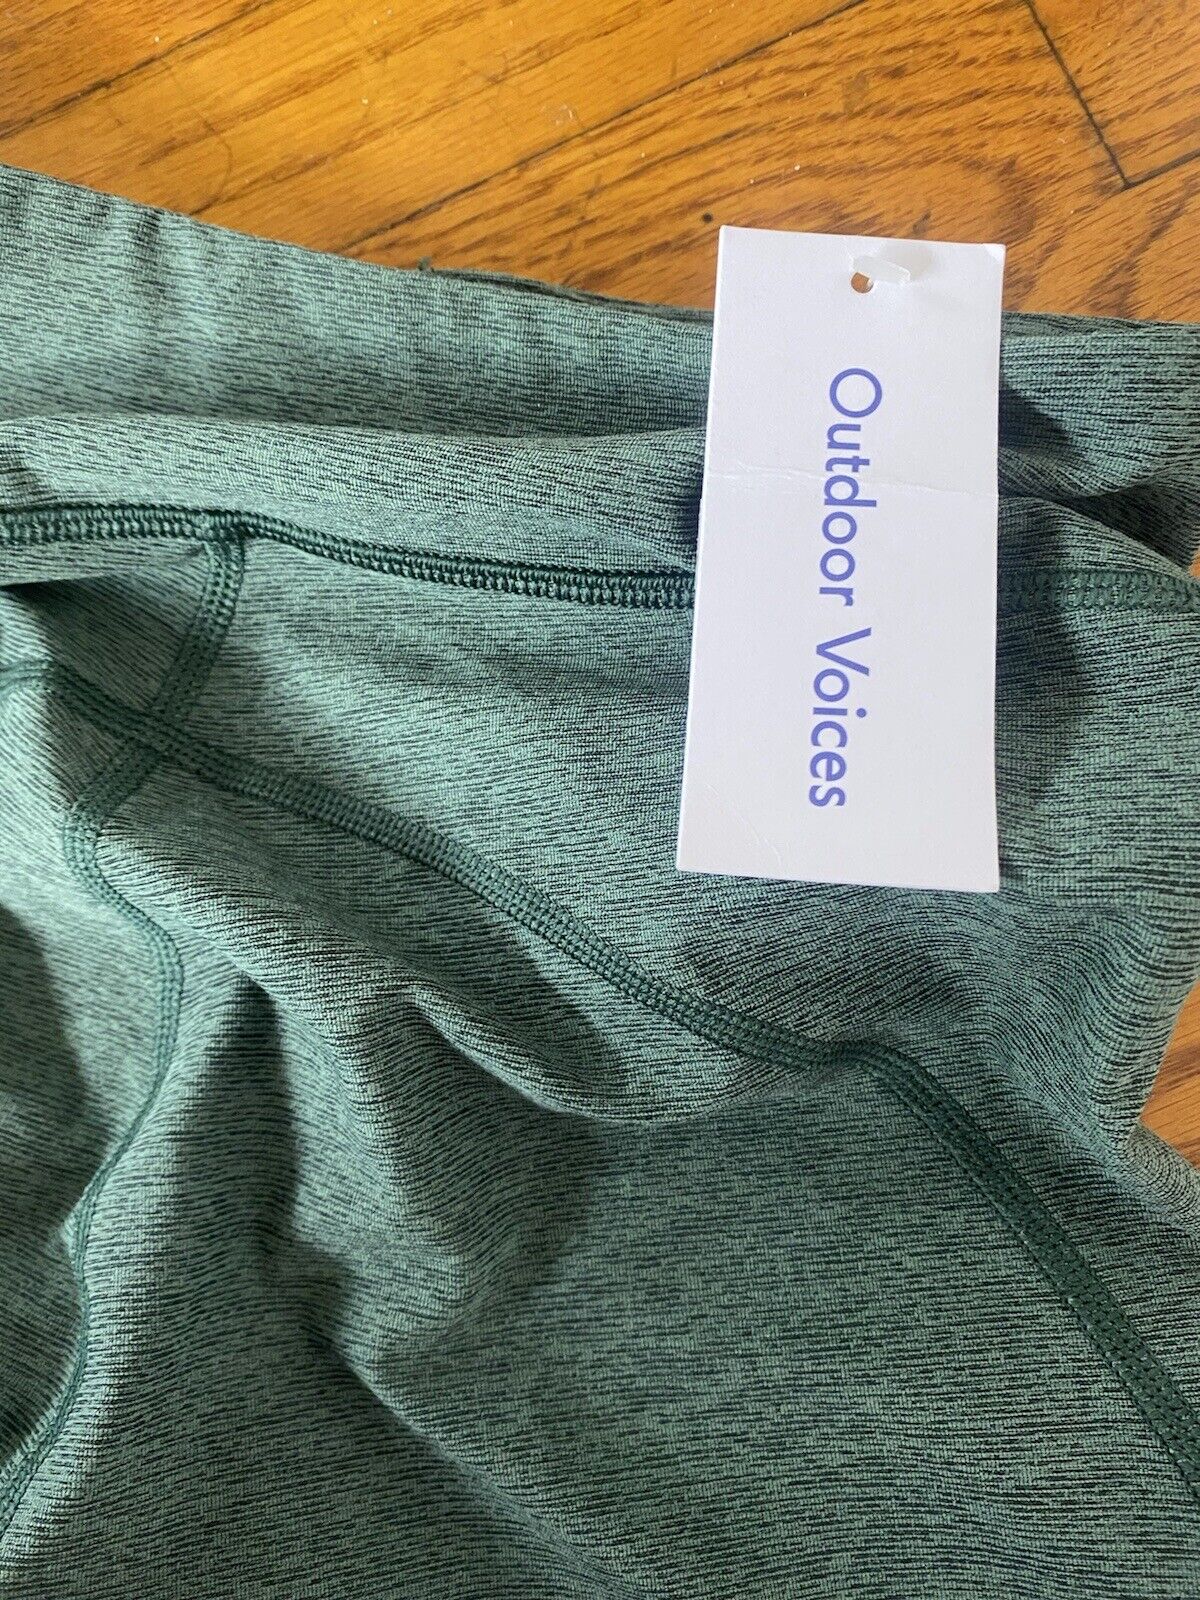 Outdoor Voices Warm-Up 3/4 Leggings NWT $78 Women XS Hunter Green Running Yoga